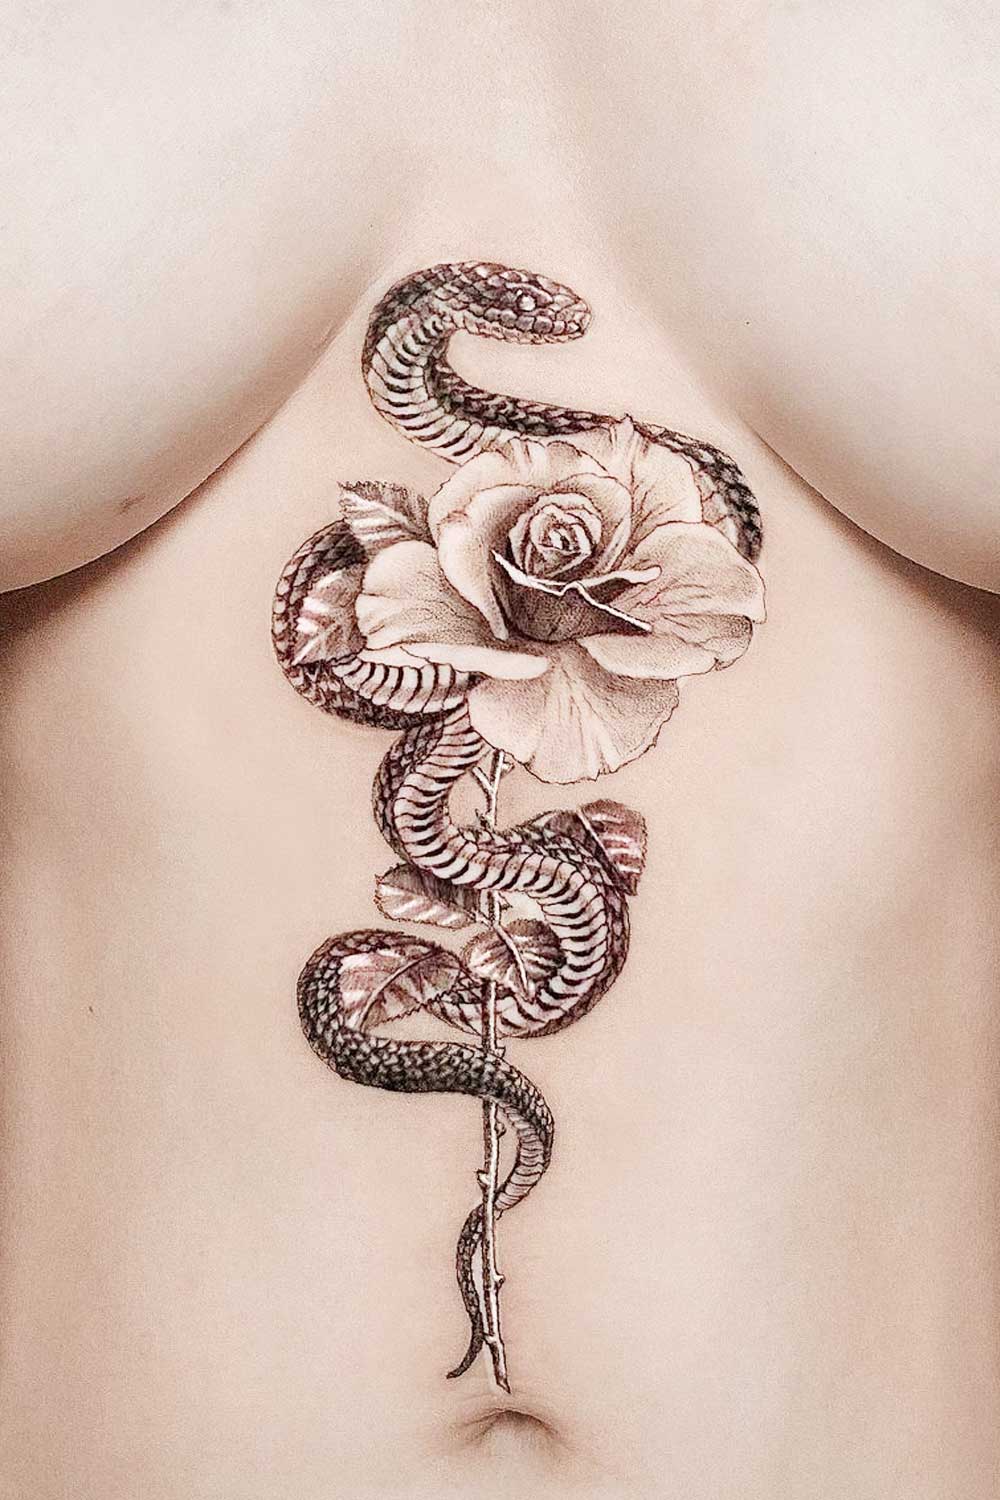 Rose Tattoos - Different Types With Pictures